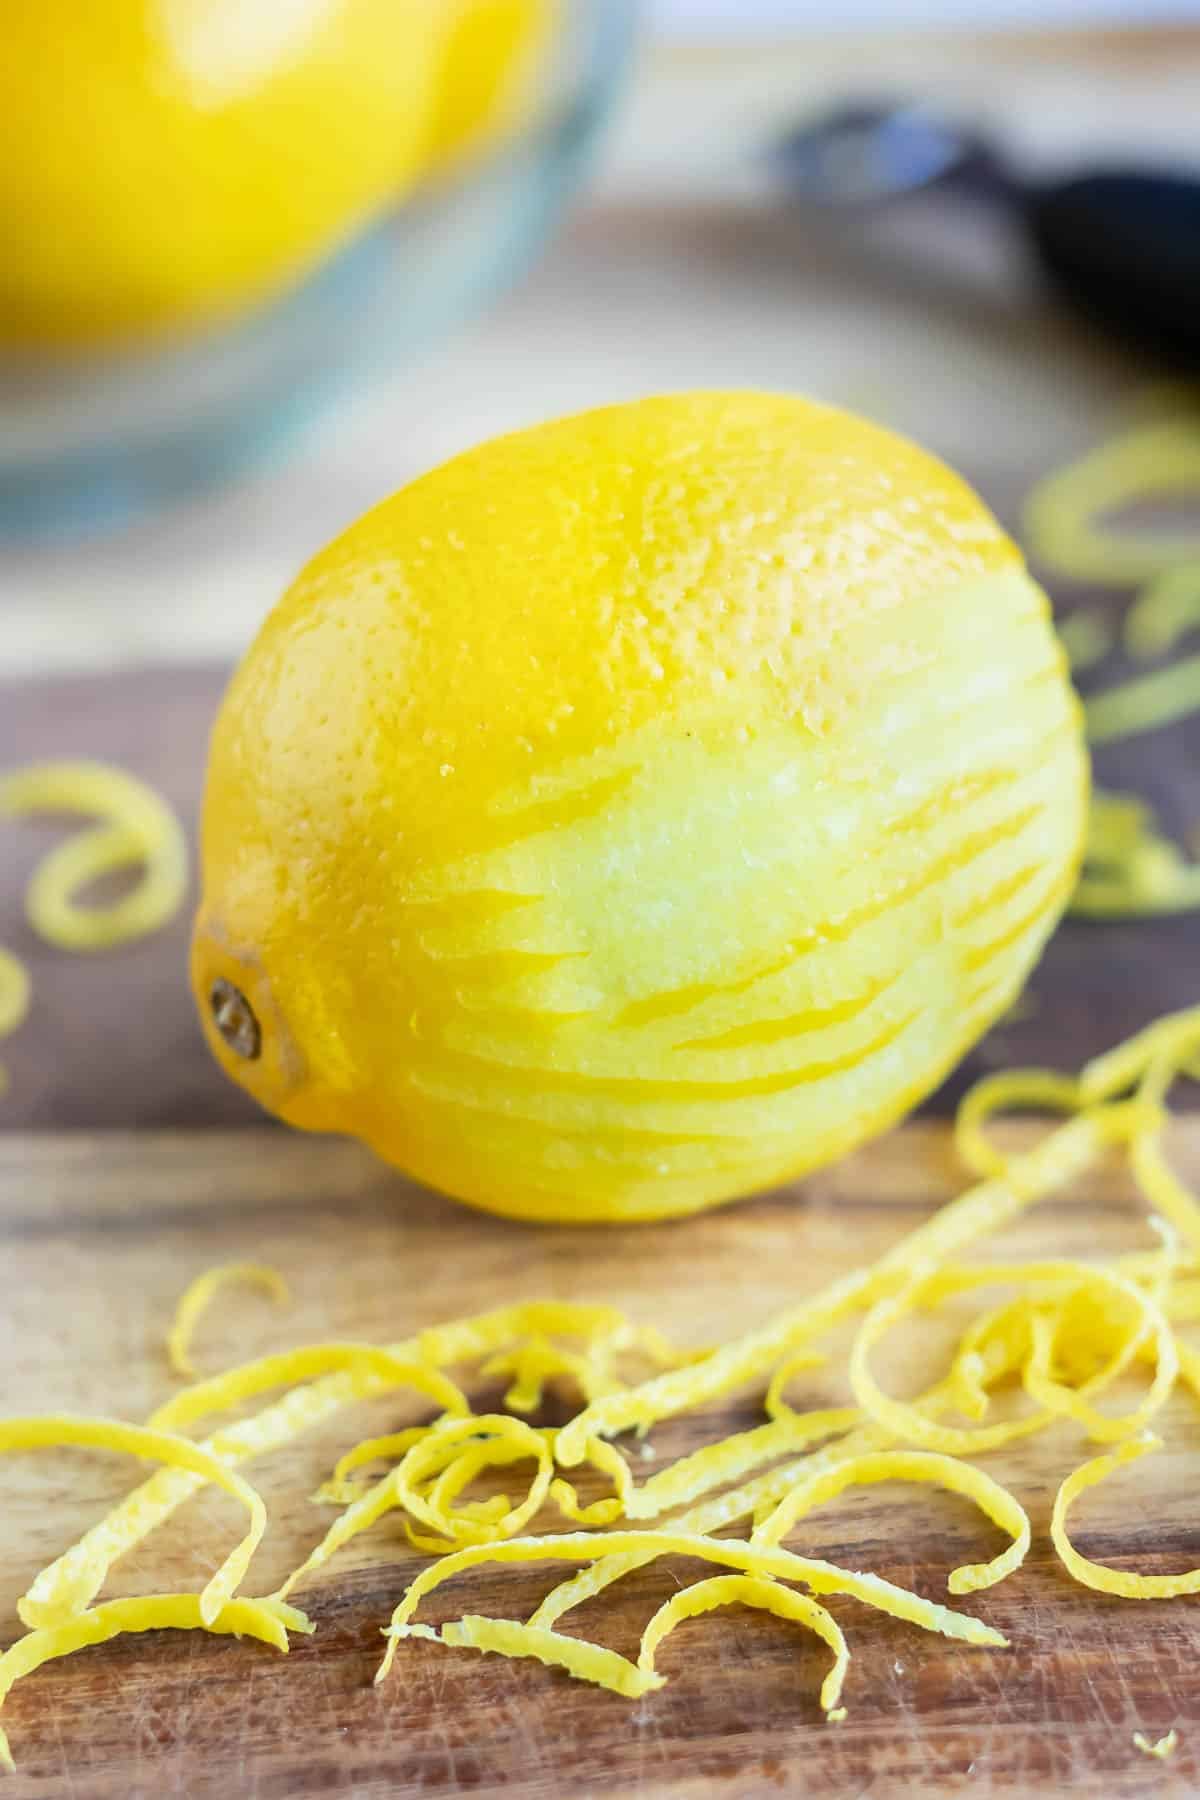 A lemon that has been partially zested on a cutting board with lemon zest around it.